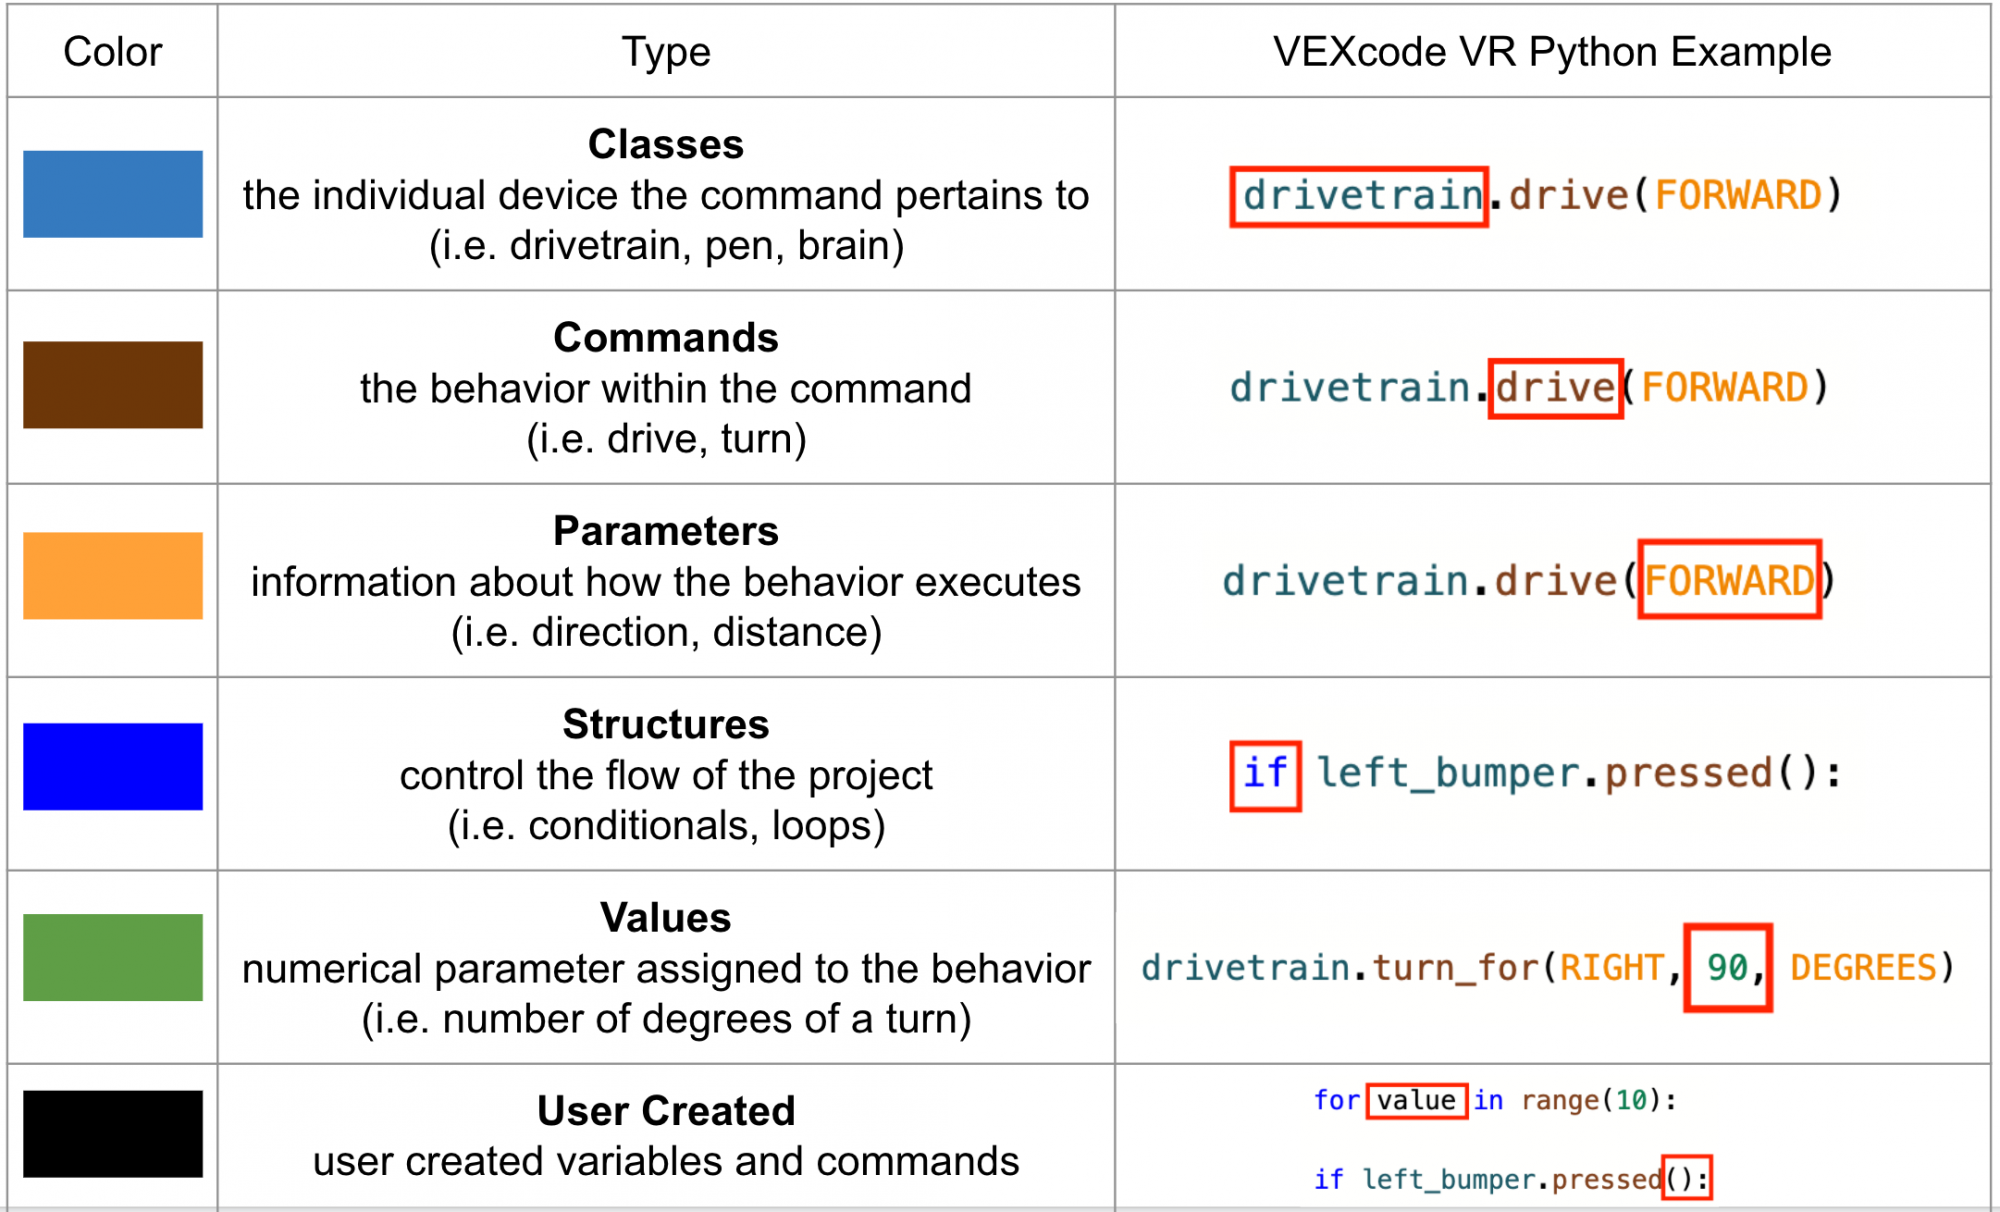 color coding conventions of the commands in VEXcode VR Python